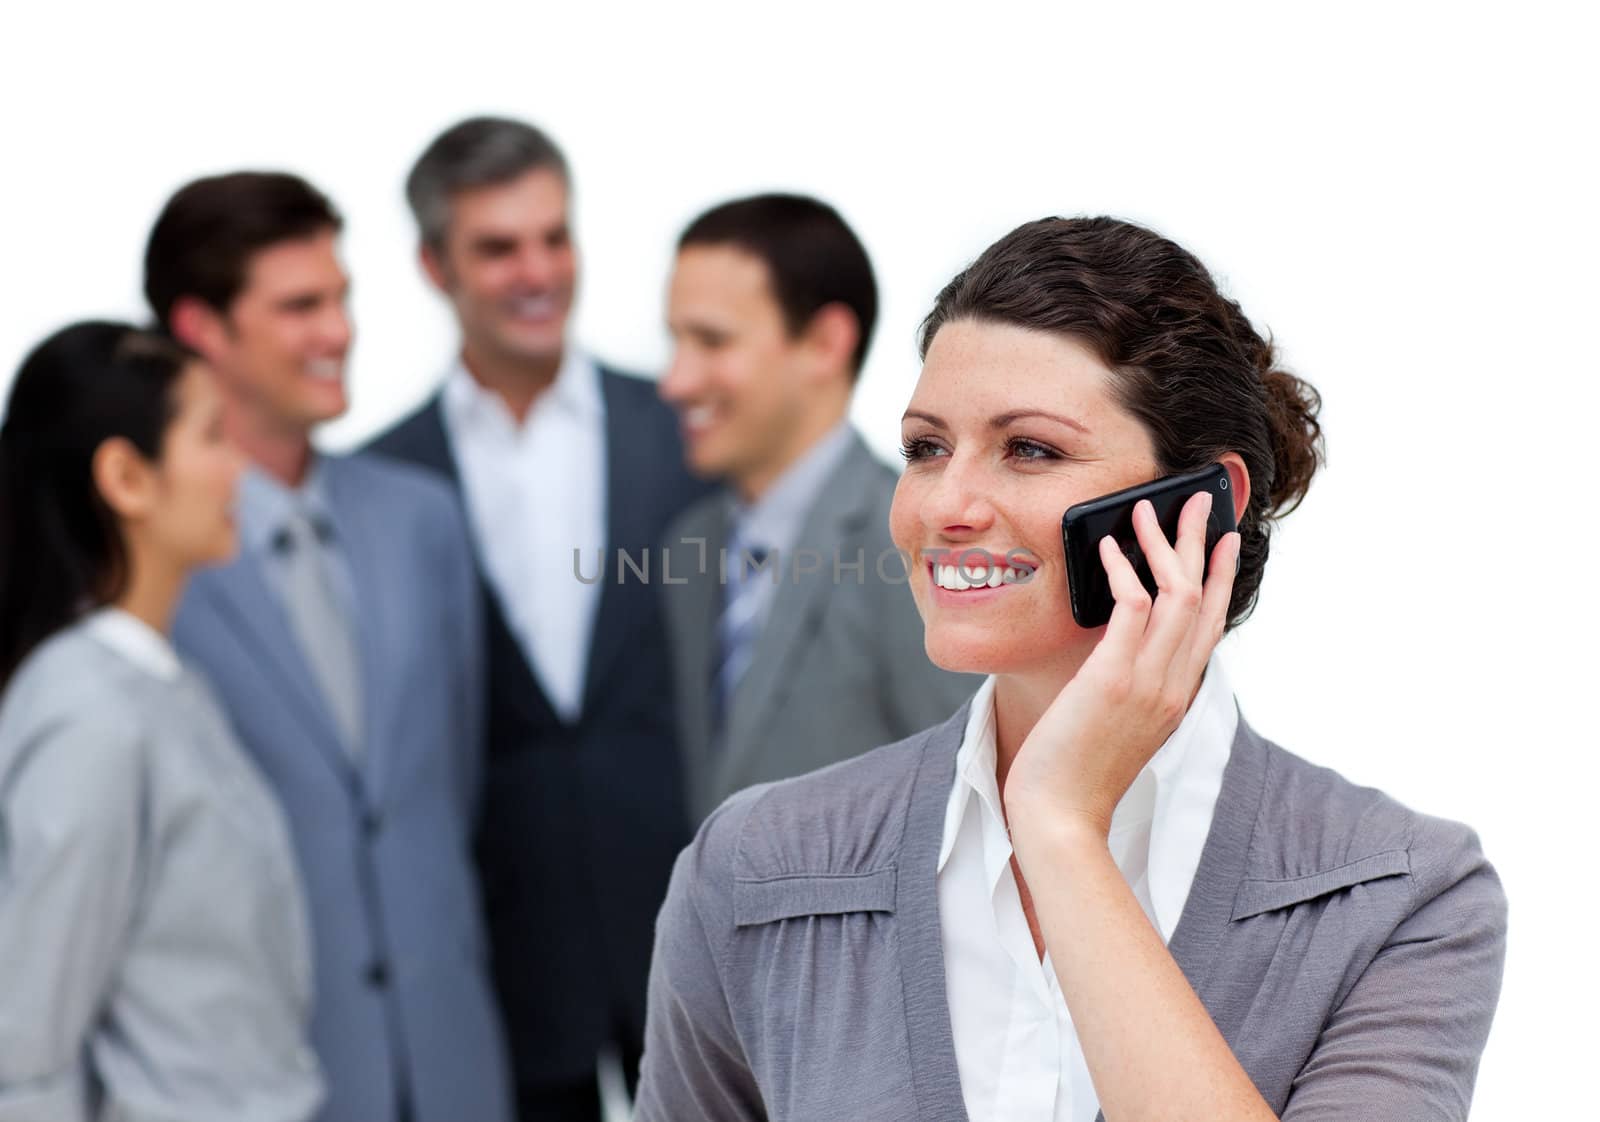 Caucasian woman talking on phone in front of her team against a white background